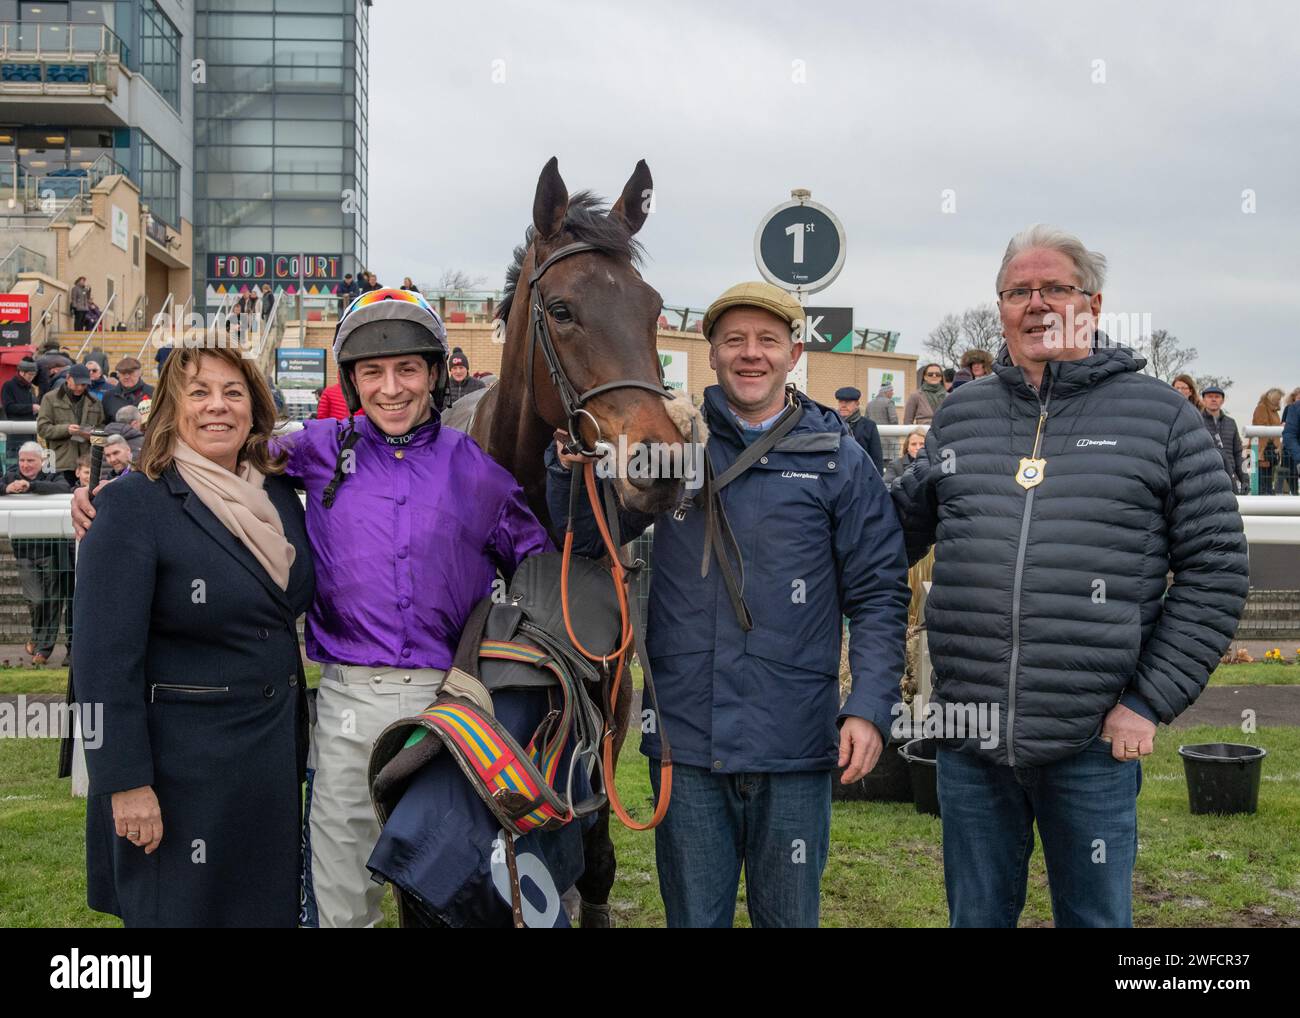 Some Scope wins SBK Handicap Chase (Go North Red Rum Series Qualifier) at Doncaster on 28 Jan 24 for Richard Hobson, Gavin Sheehan and Rubicon Racing Stock Photo